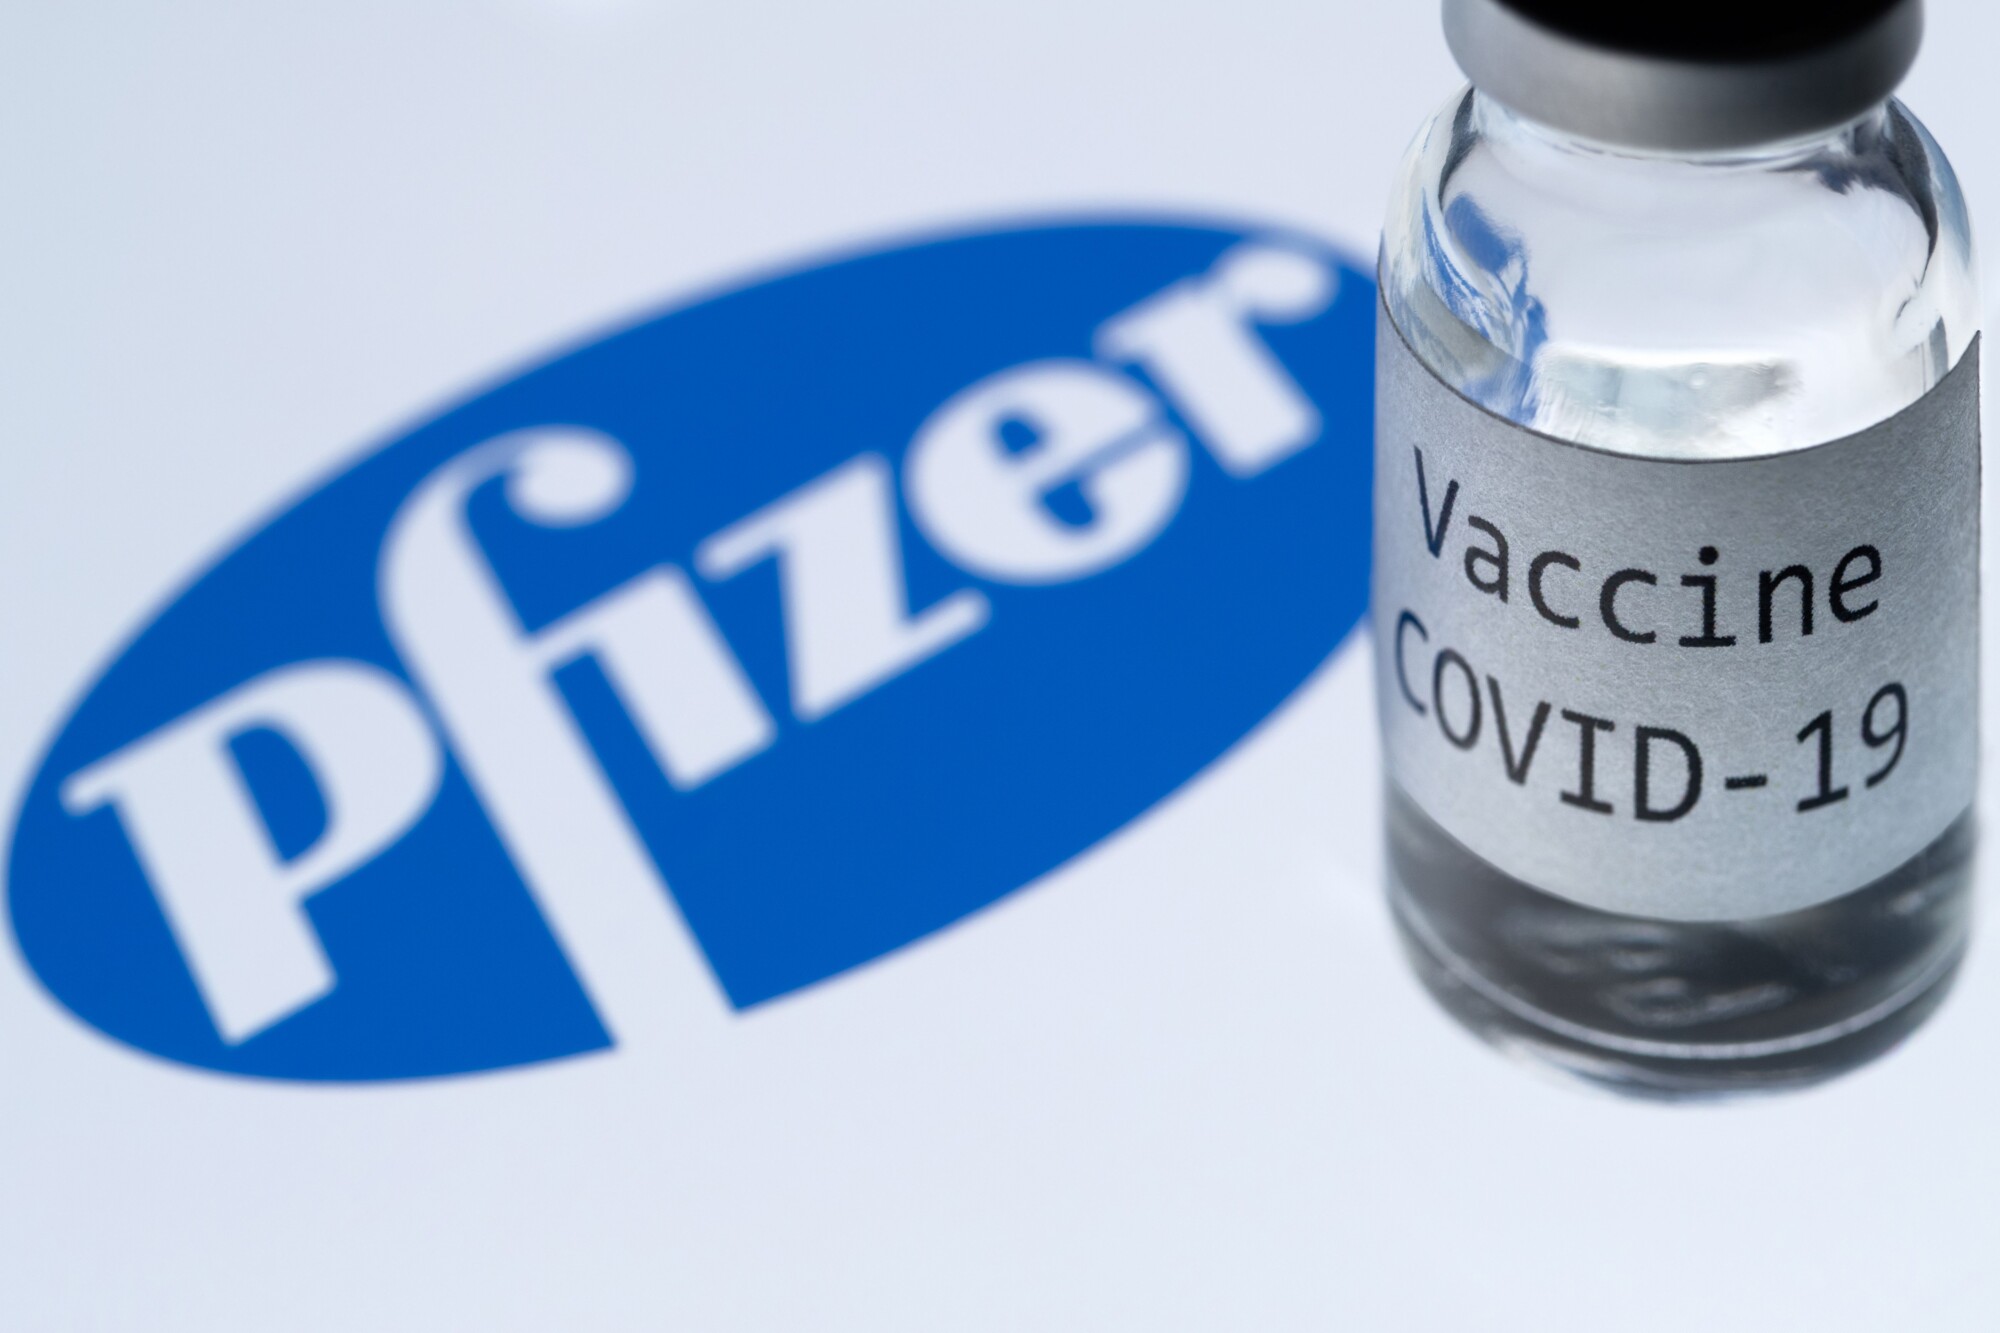 Pfizer Responds After Director Says Company Is Developing Ways to Mutate COVID-19